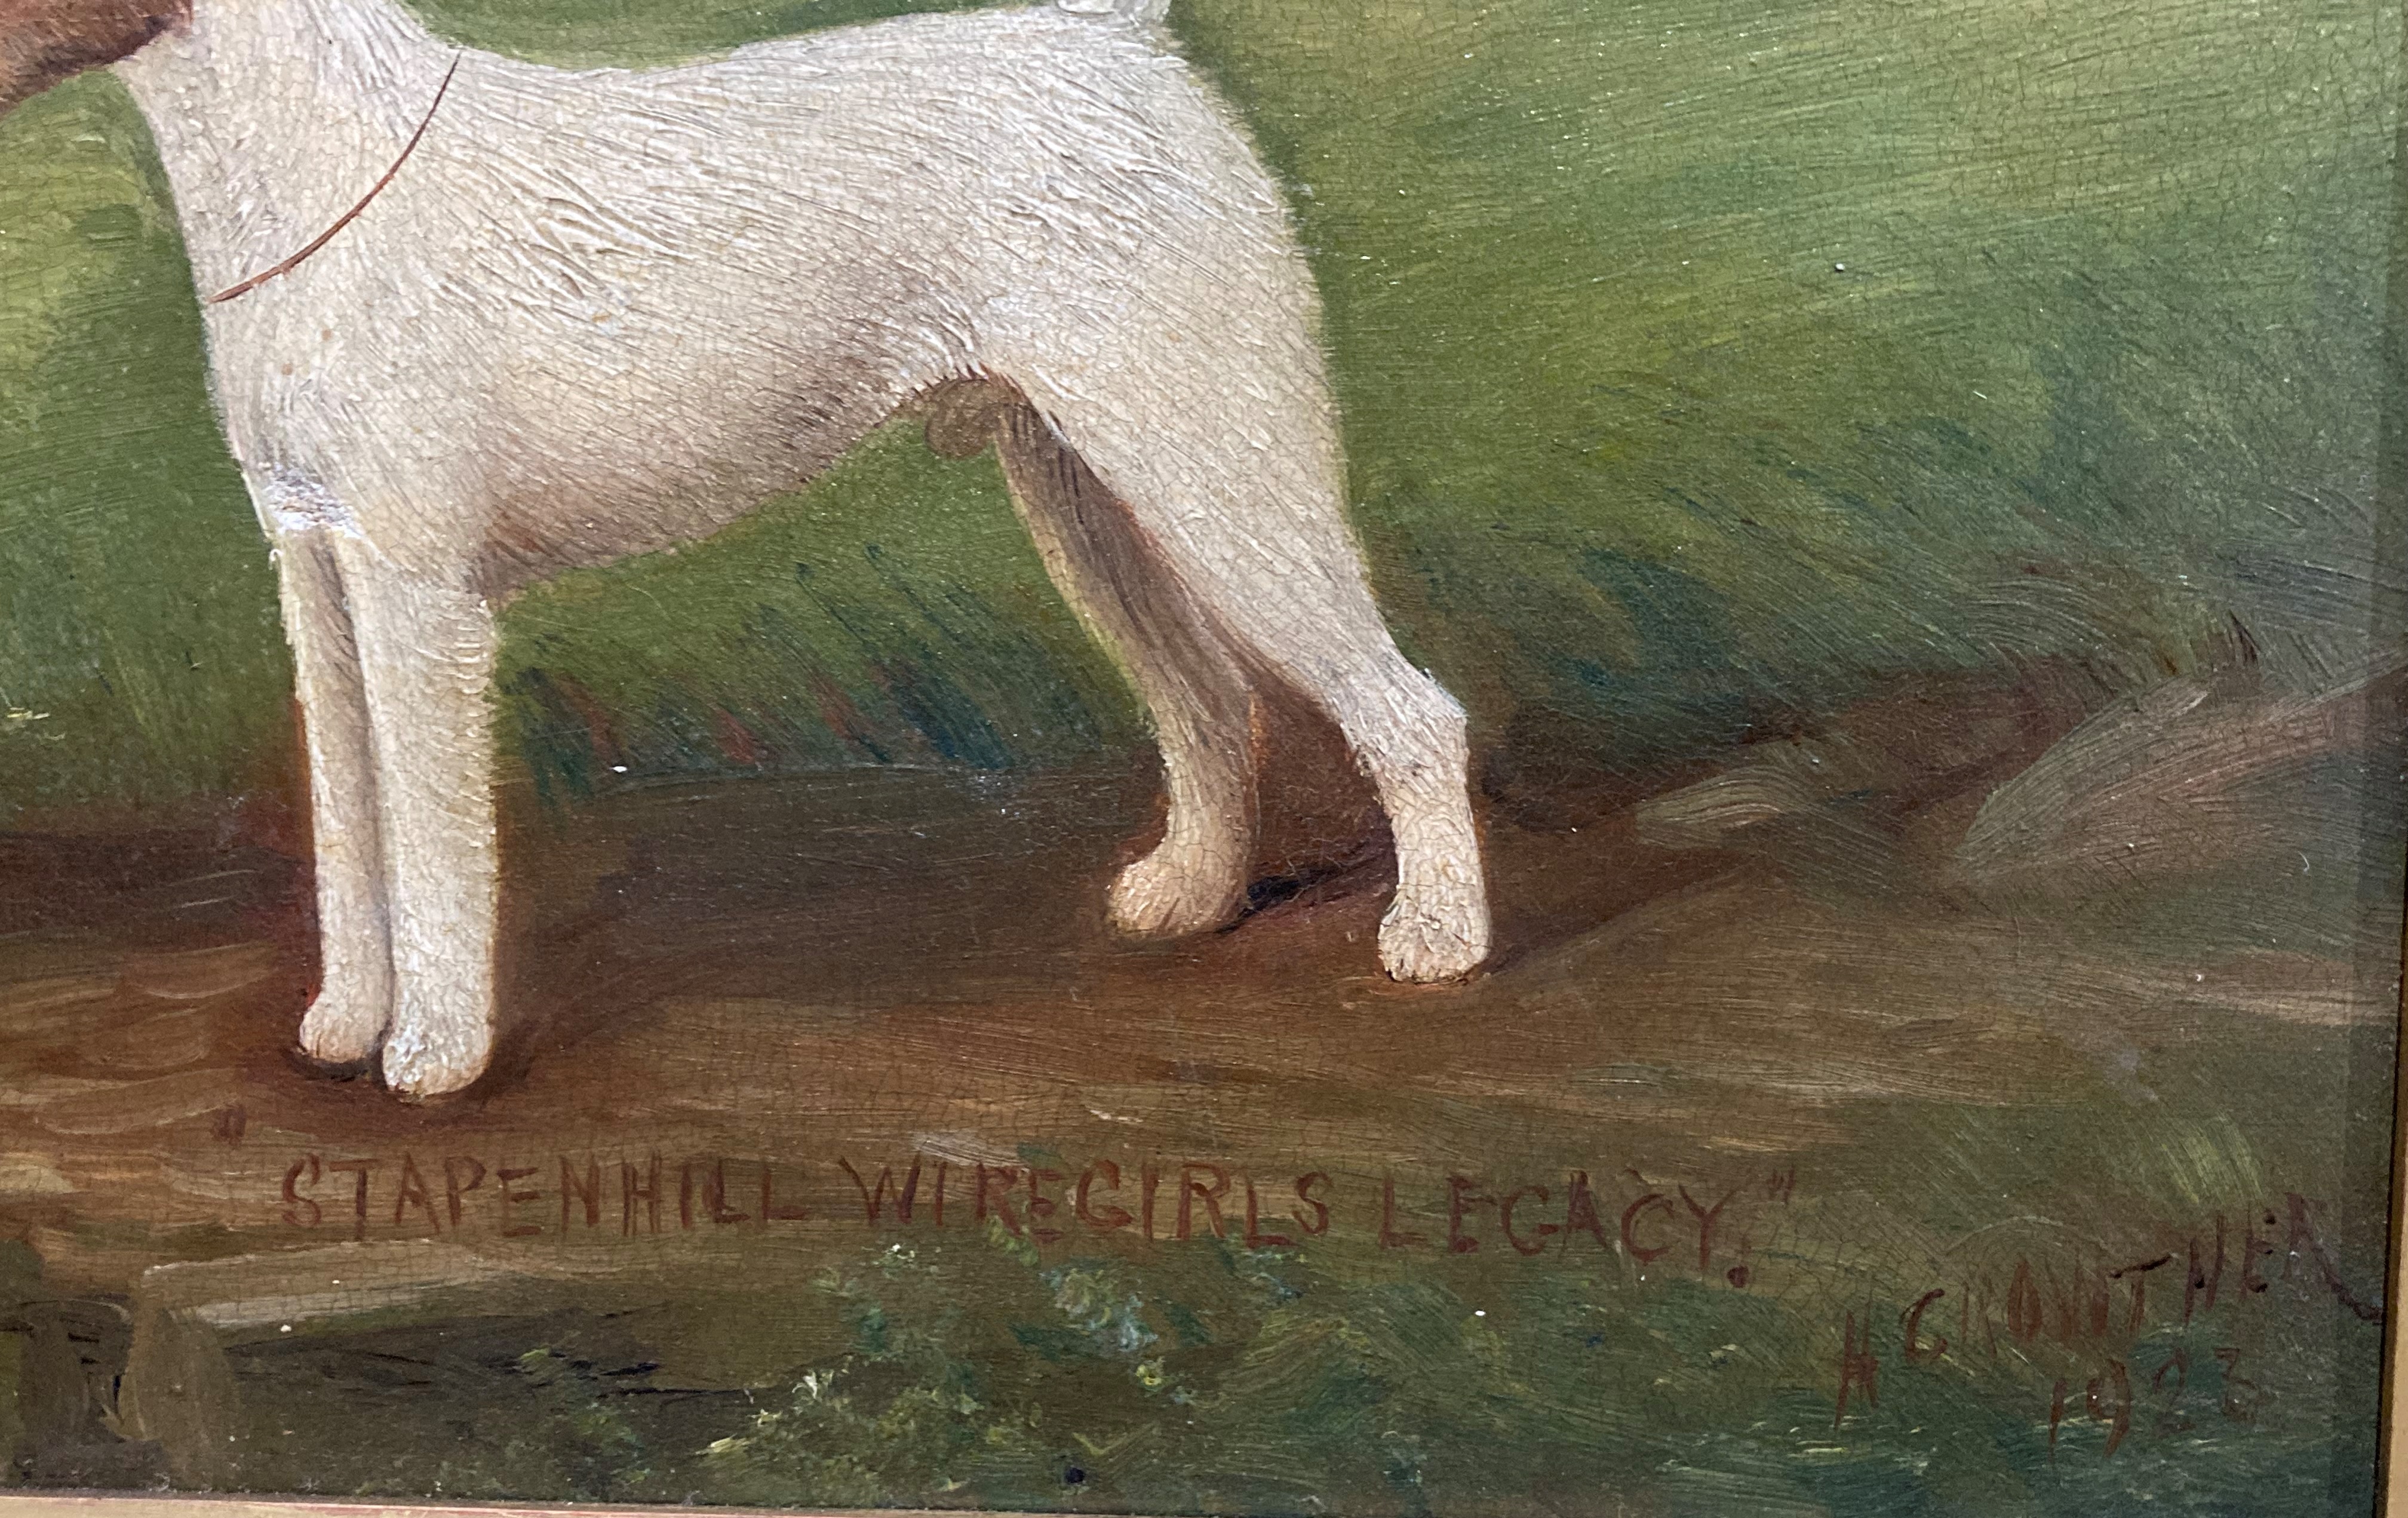 H Crowther 1923, 'Stapenhill Wiregirls Legacy', study of a fox terrier, oil on canvas, - Image 4 of 32